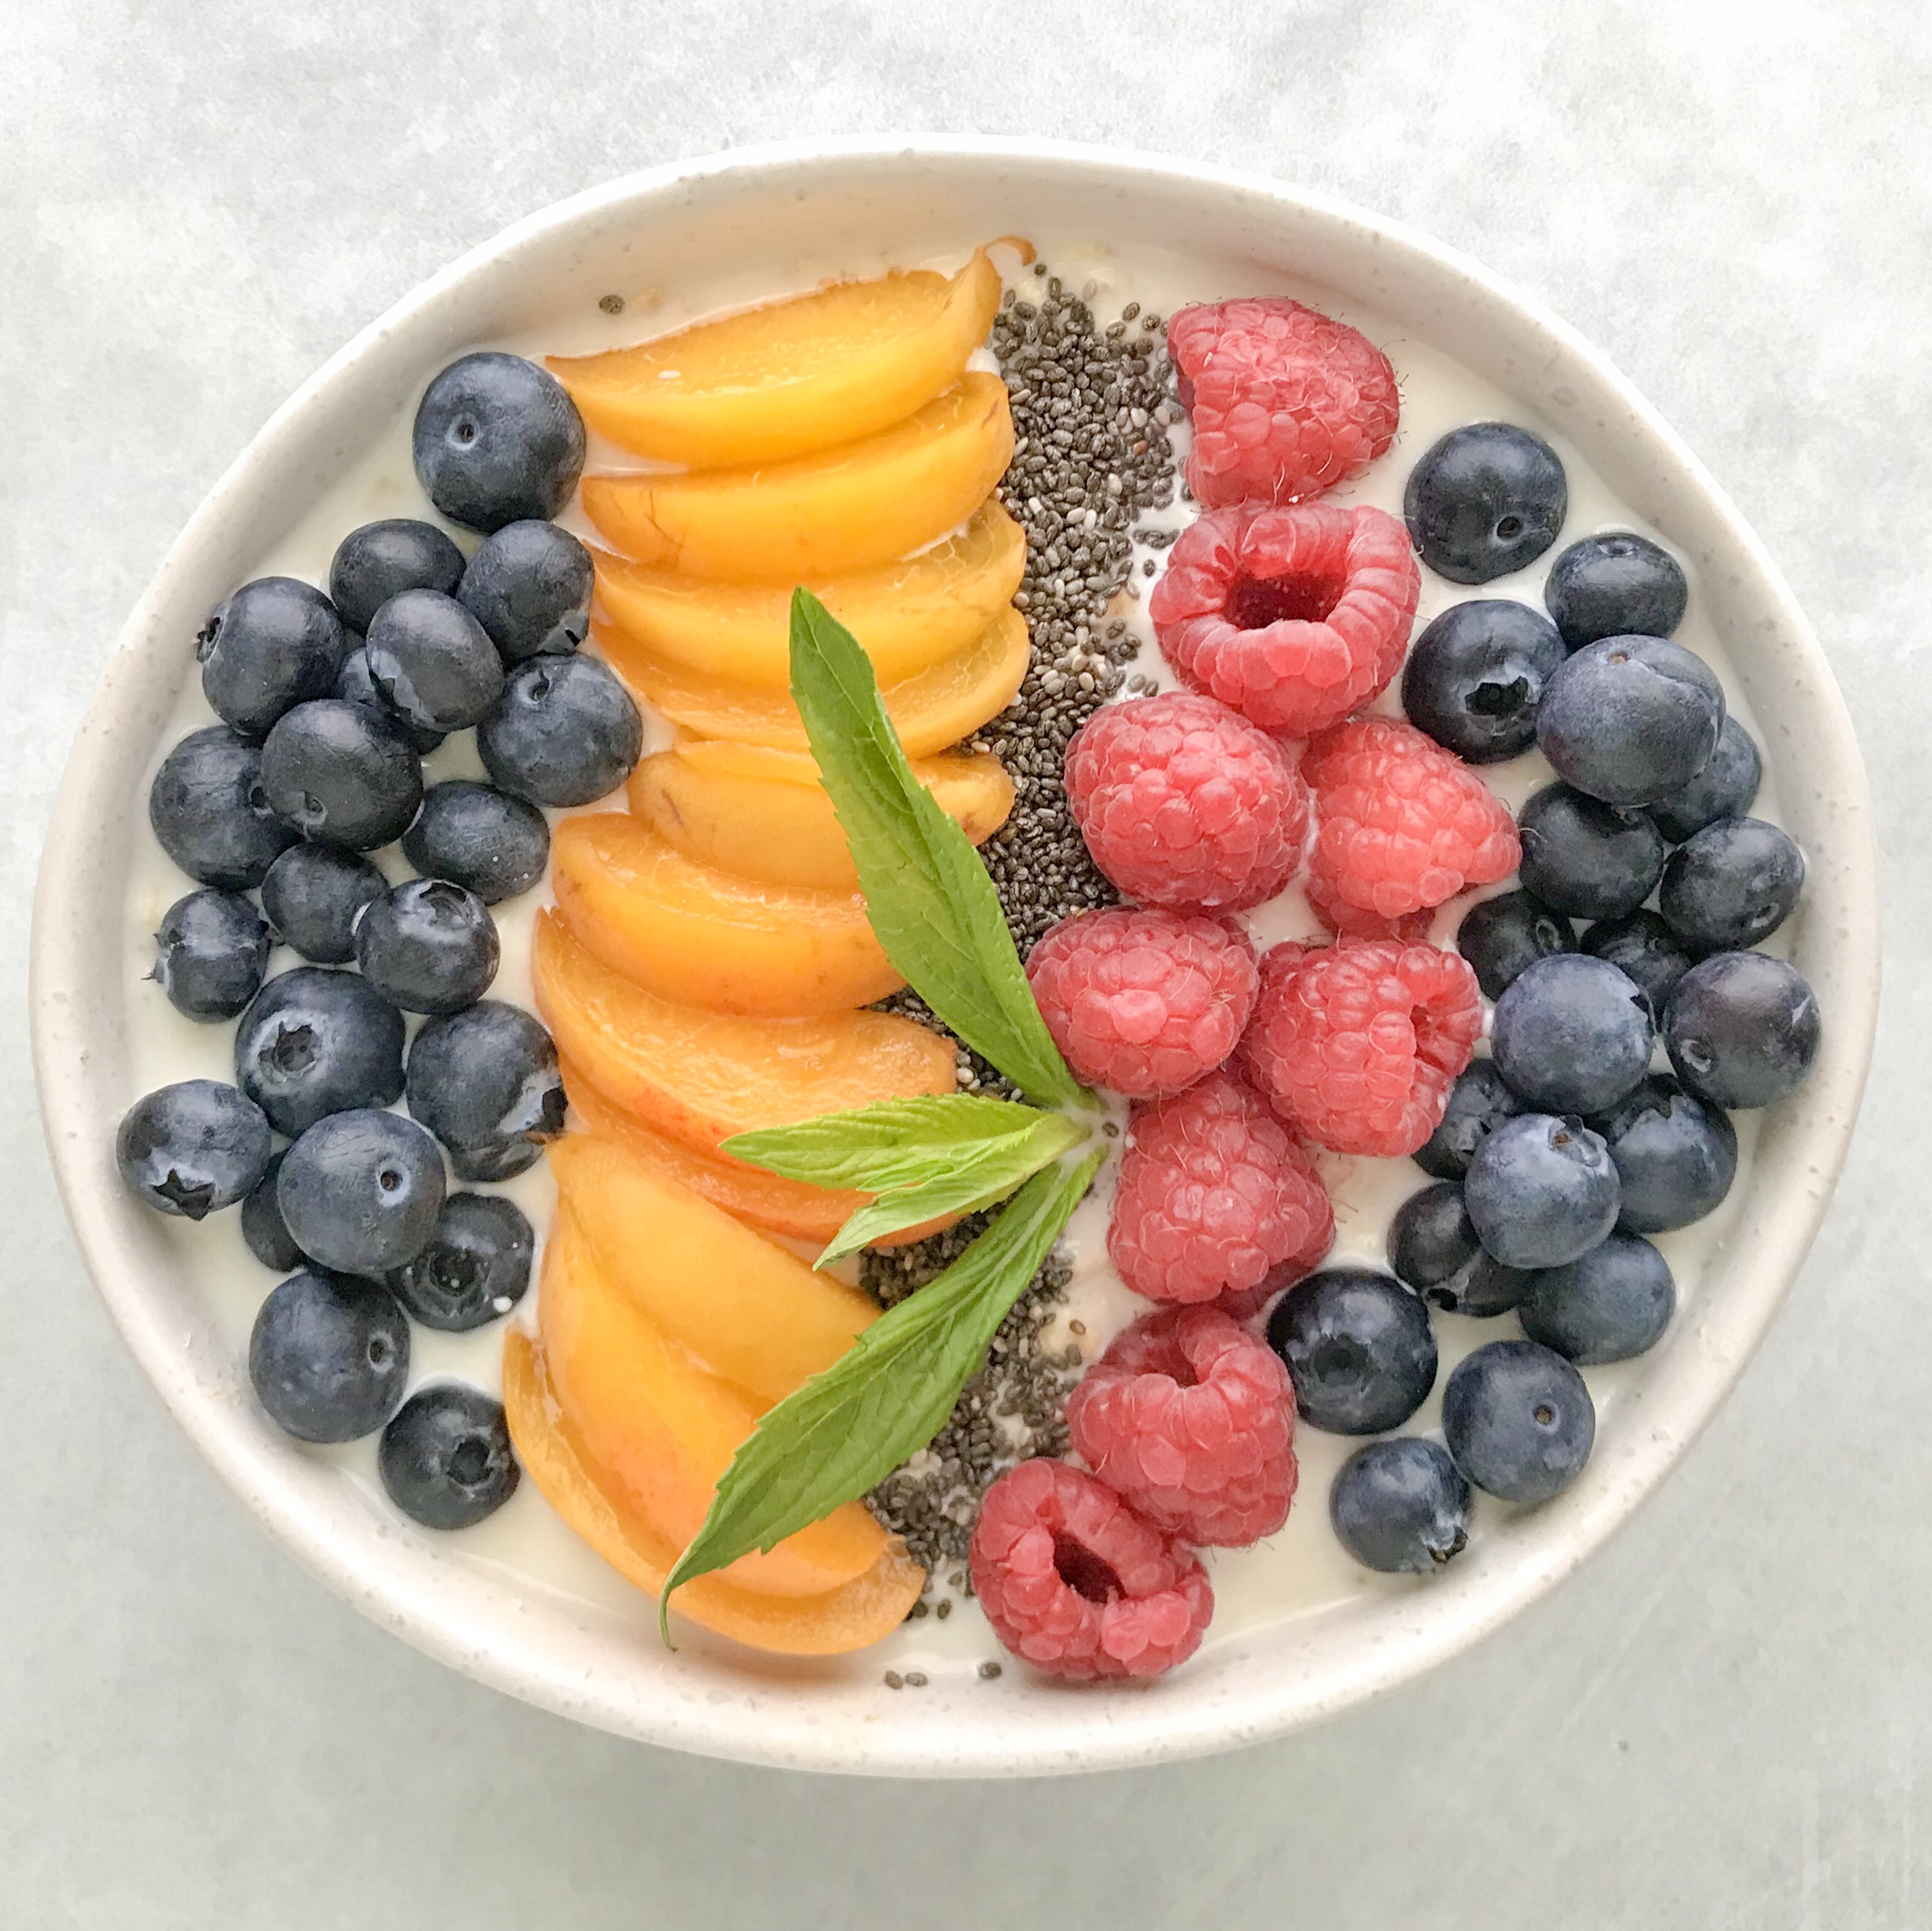 Overnight oats with fruit